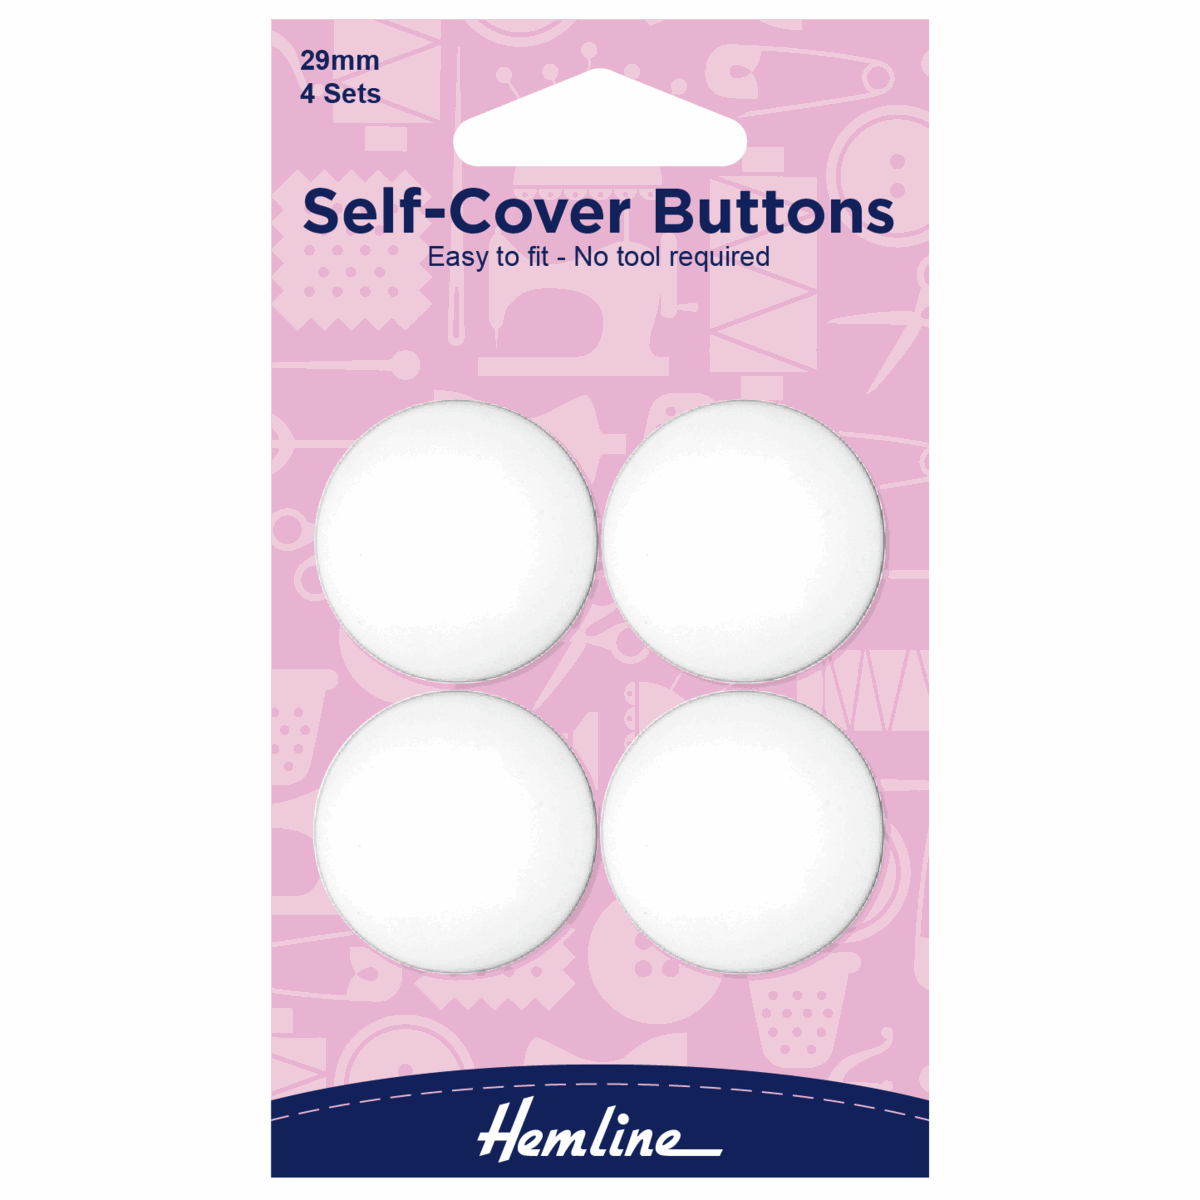 Self-Cover Buttons: Nylon: 29mm